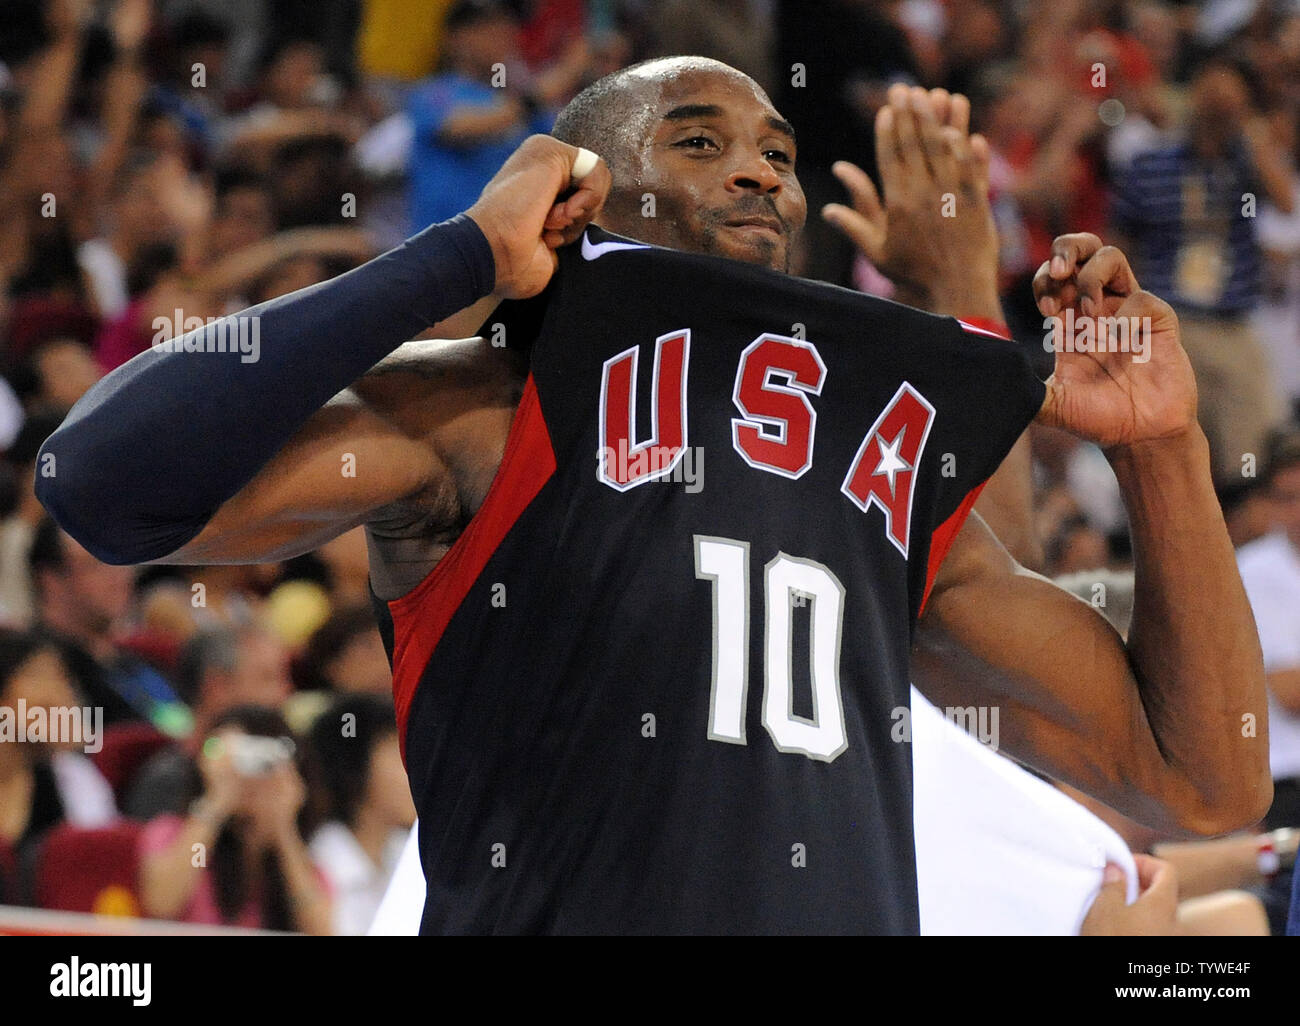 Kobe Bryant Quote: “I wear the number 10 Jersey for the US